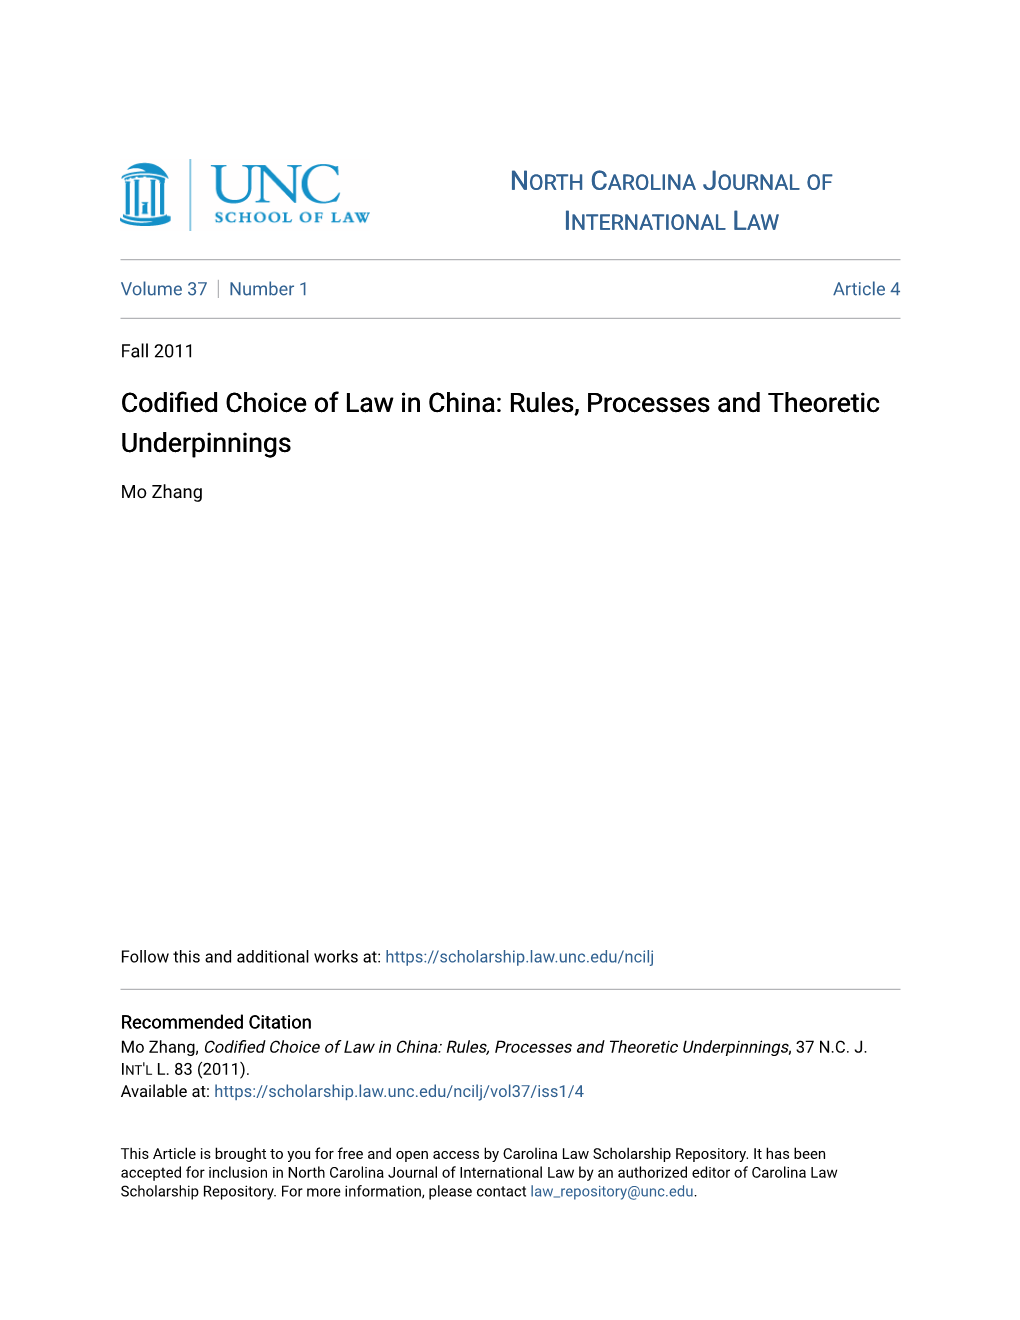 Codified Choice of Law in China: Rules, Processes and Theoretic Underpinnings